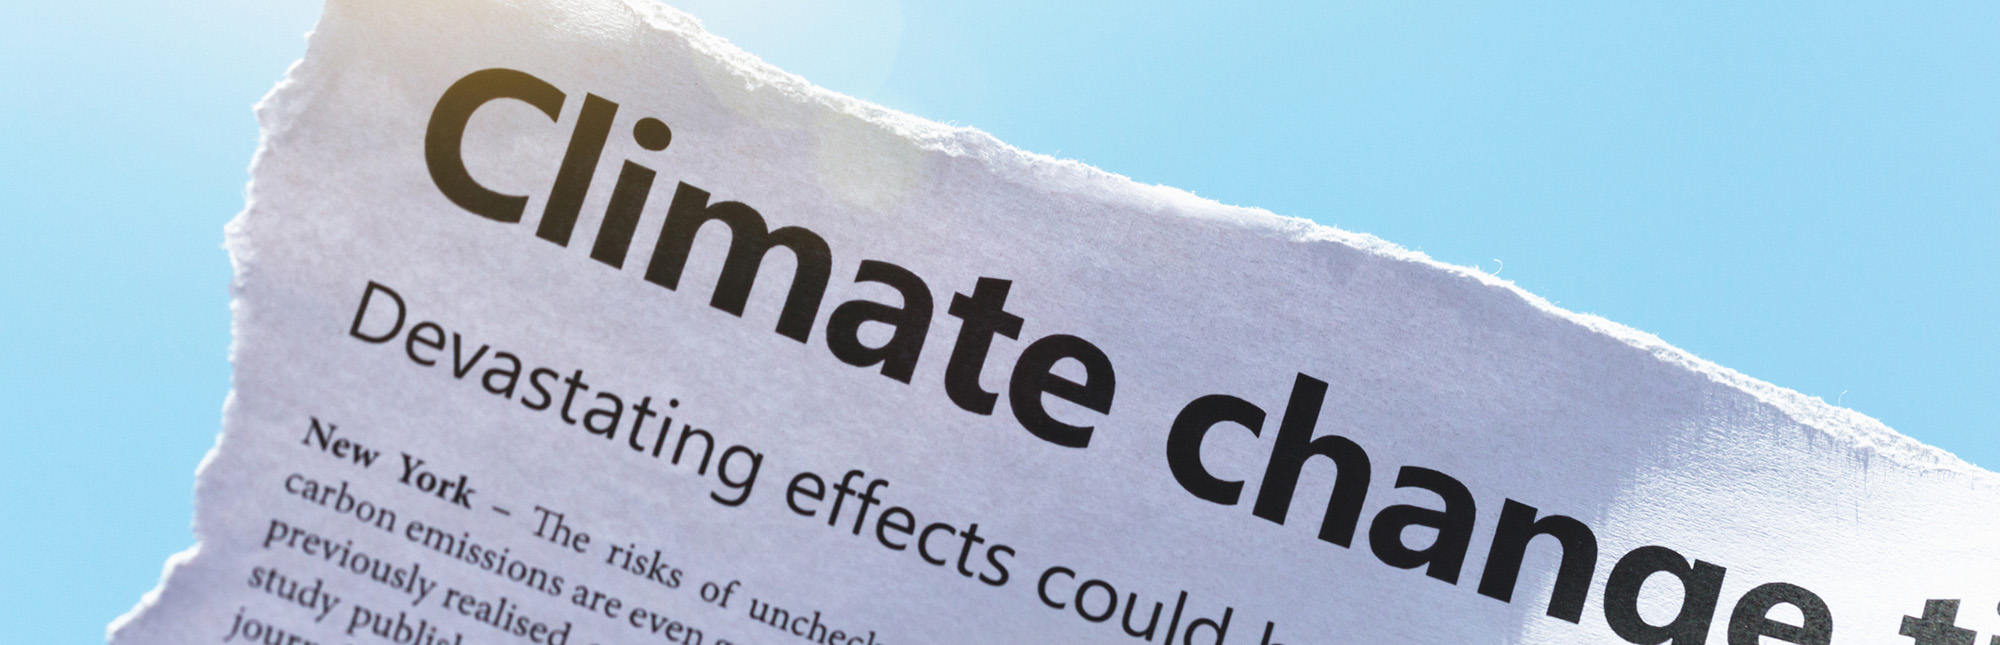 IMage of newspaper reading "Climate change"